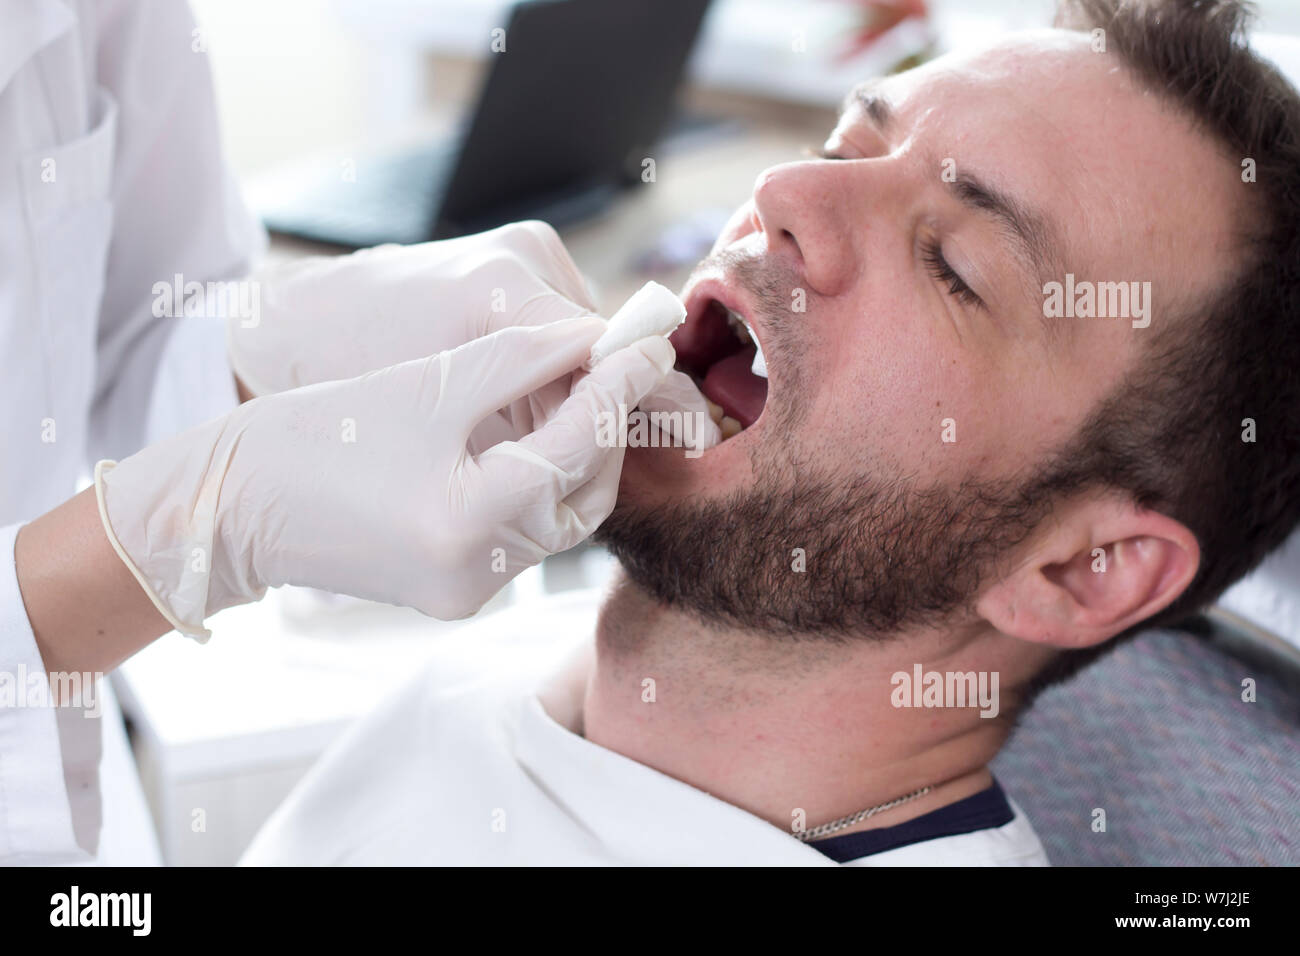 face of a white man with an open mouth on a dental chair. The doctor's hands in white gloves change the lignin roller in the patient's mouth. Stock Photo